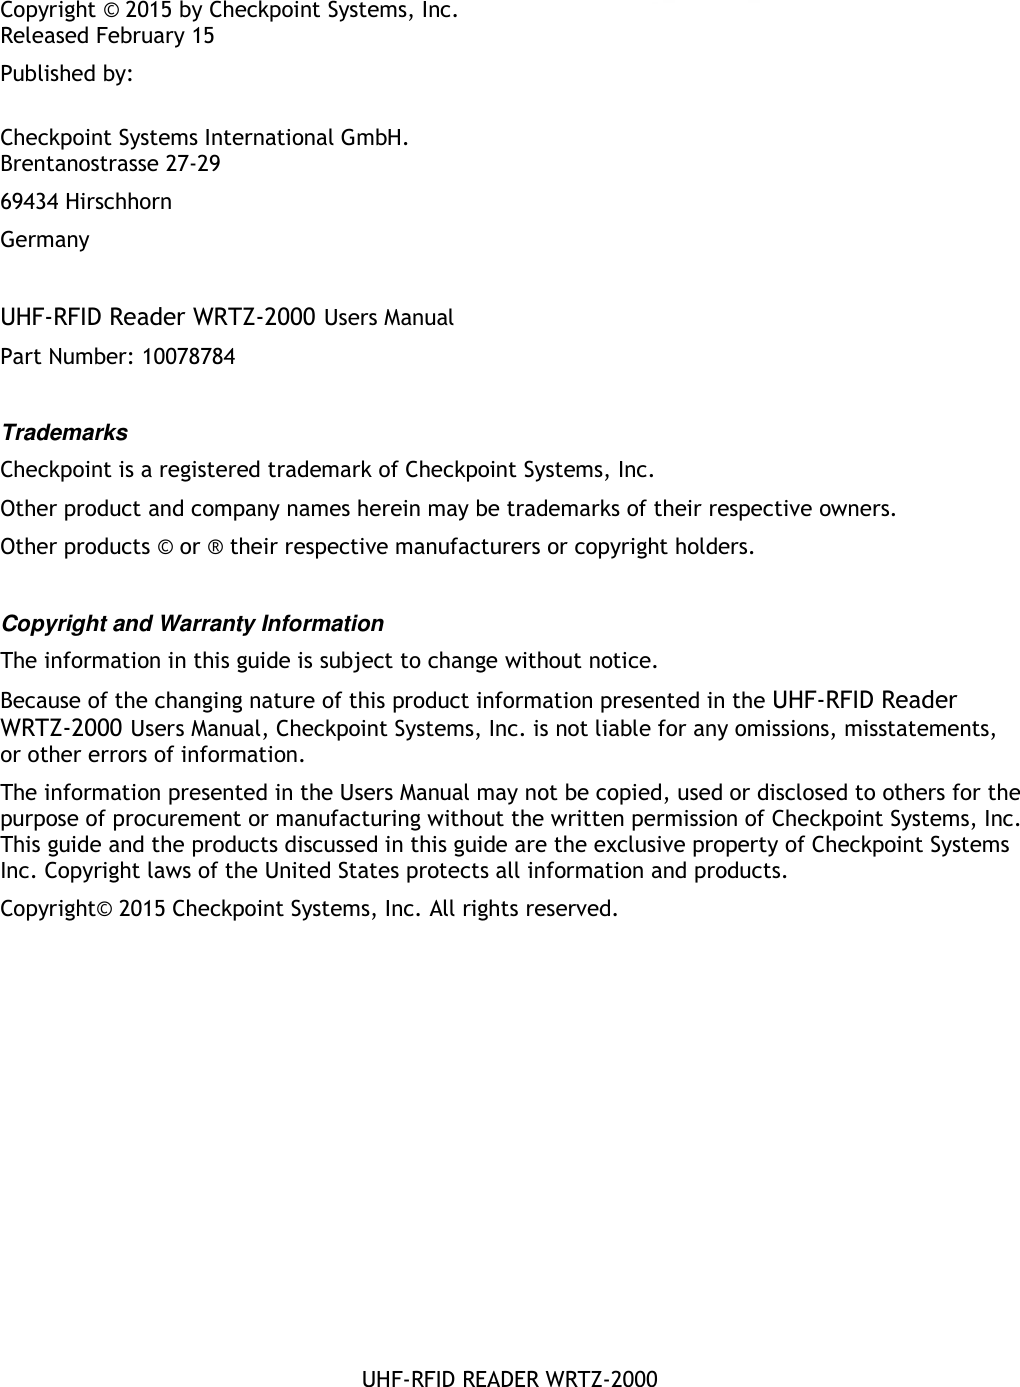    UHF-RFID READER WRTZ-2000 Copyright © 2015 by Checkpoint Systems, Inc. Released February 15 Published by:  Checkpoint Systems International GmbH. Brentanostrasse 27-29 69434 Hirschhorn Germany  UHF-RFID Reader WRTZ-2000 Users Manual Part Number: 10078784  Trademarks Checkpoint is a registered trademark of Checkpoint Systems, Inc.  Other product and company names herein may be trademarks of their respective owners. Other products © or ® their respective manufacturers or copyright holders.  Copyright and Warranty Information The information in this guide is subject to change without notice. Because of the changing nature of this product information presented in the UHF-RFID Reader WRTZ-2000 Users Manual, Checkpoint Systems, Inc. is not liable for any omissions, misstatements, or other errors of information. The information presented in the Users Manual may not be copied, used or disclosed to others for the purpose of procurement or manufacturing without the written permission of Checkpoint Systems, Inc. This guide and the products discussed in this guide are the exclusive property of Checkpoint Systems Inc. Copyright laws of the United States protects all information and products. Copyright© 2015 Checkpoint Systems, Inc. All rights reserved.  